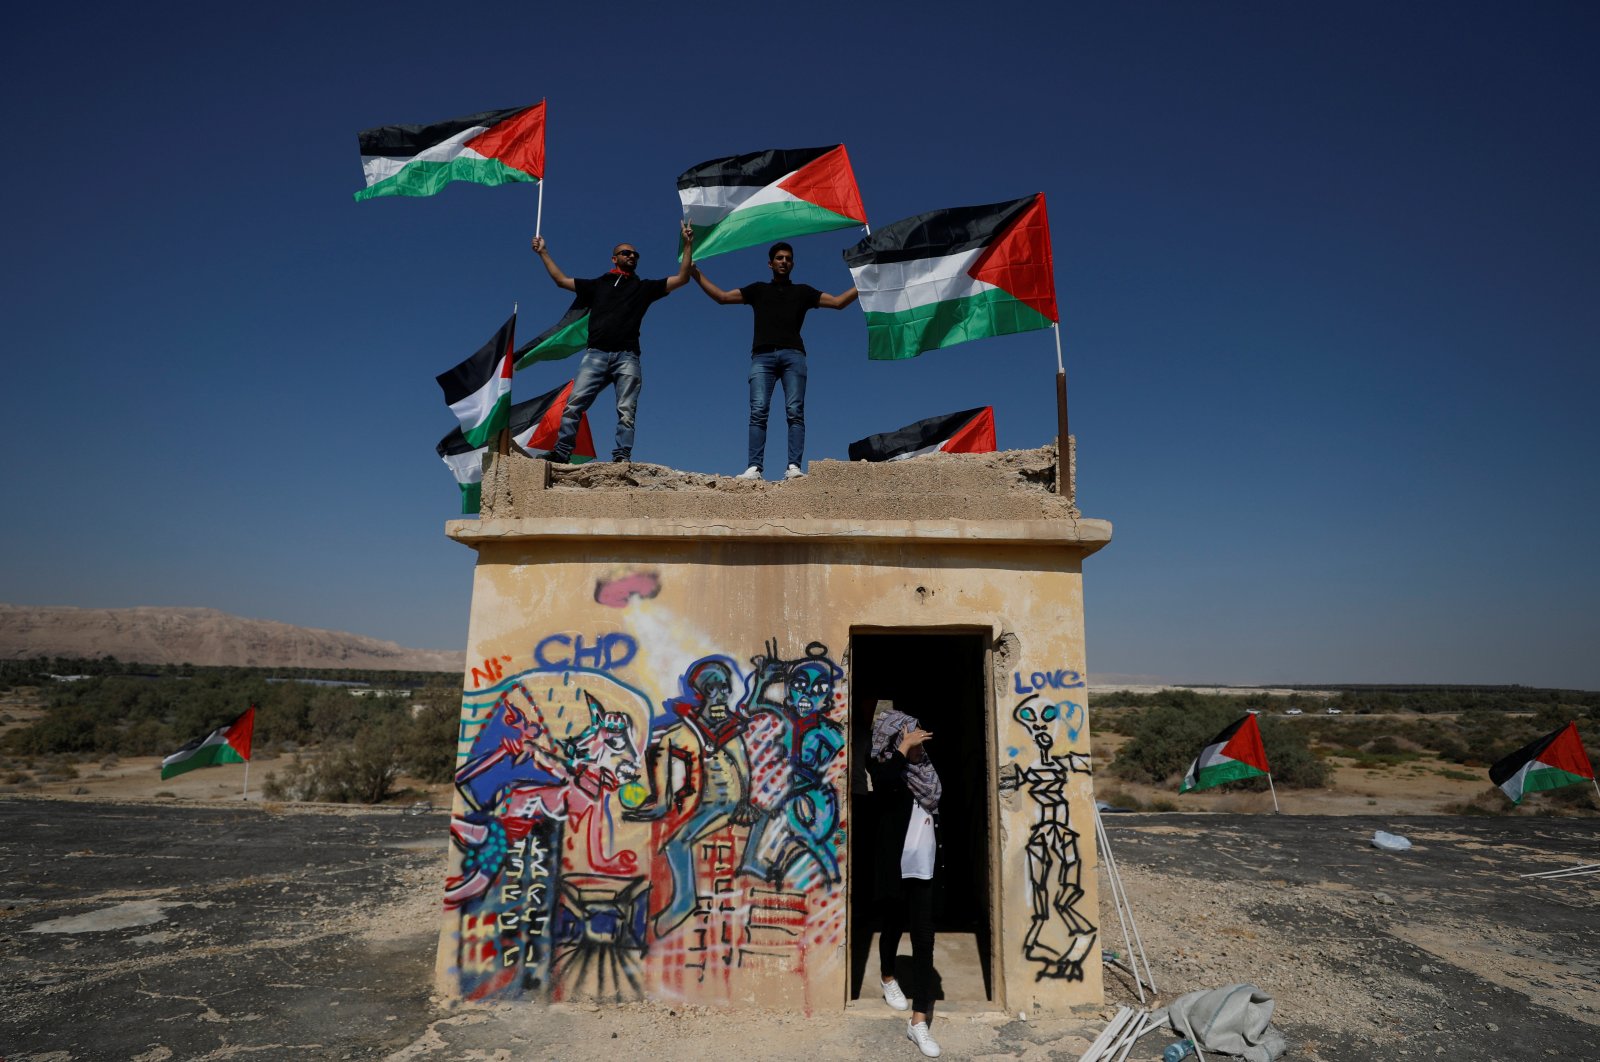 Demonstrators hold Palestinian flags during a protest against Jewish settlements near the Dead Sea in the Israeli-occupied West Bank, Sept. 28, 2019. (Reuters Photo)